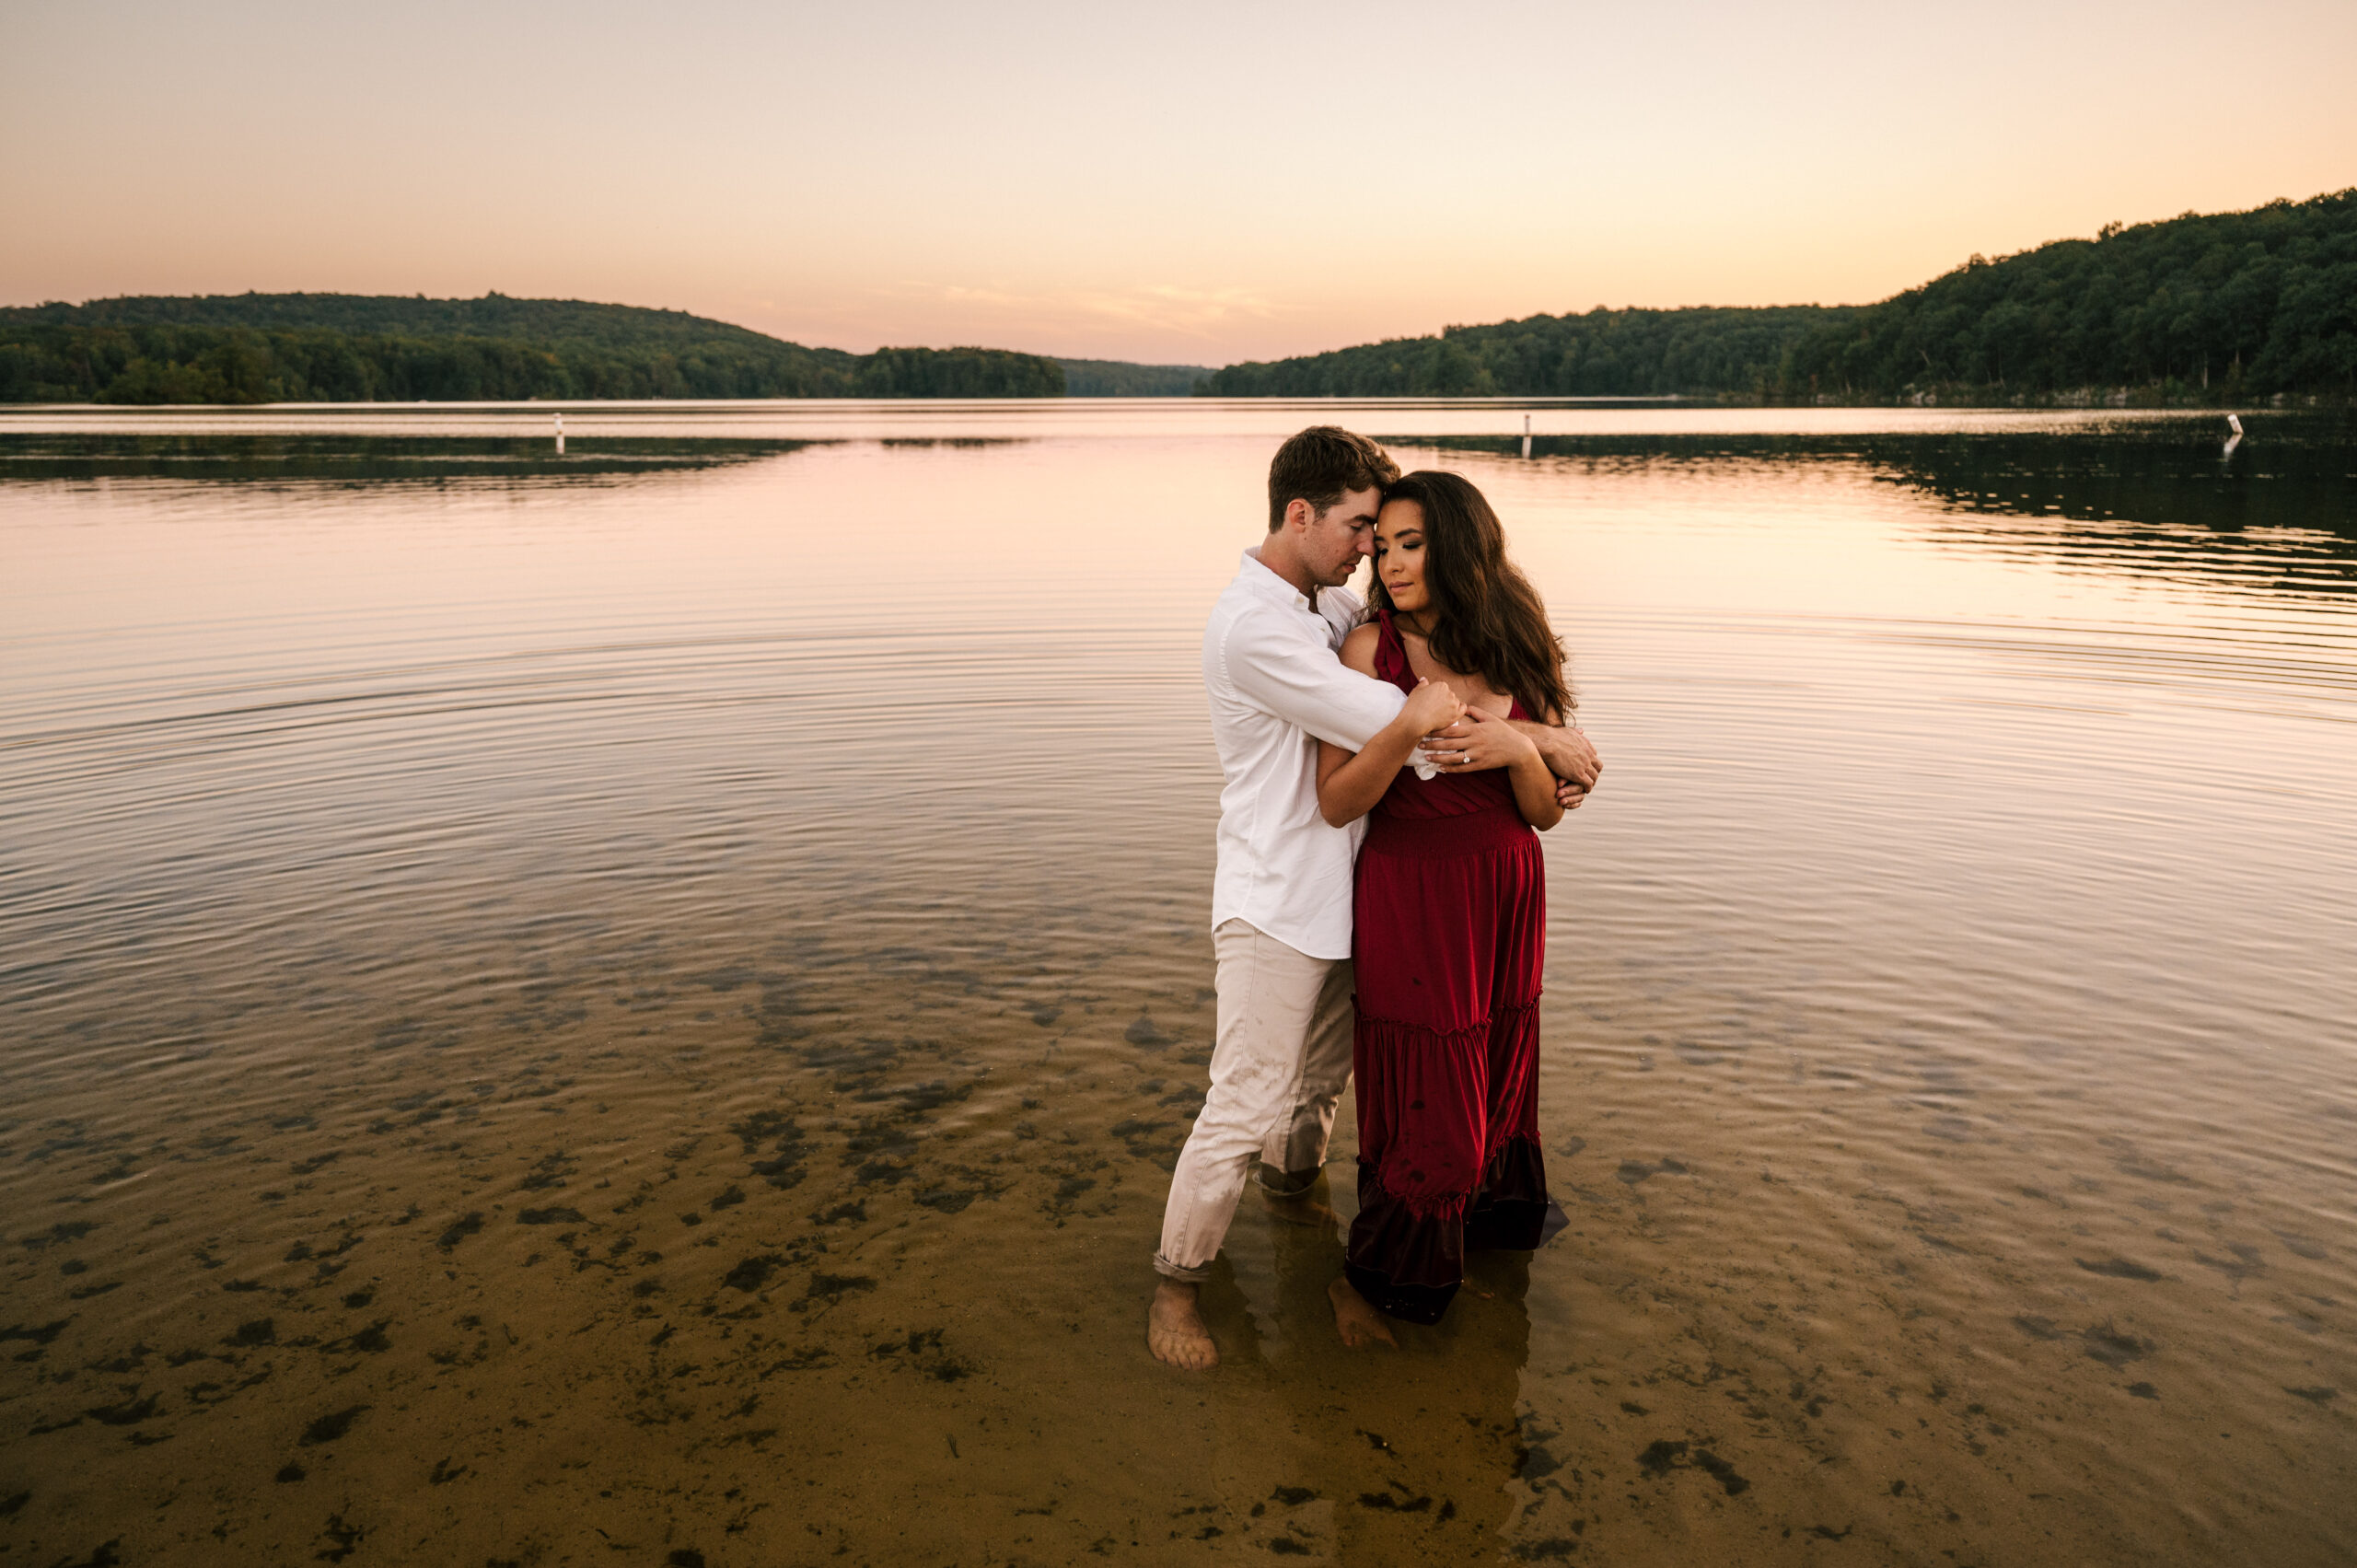 Couple standing in lake embracing, bride-to-be in red dress. Golden hour sunset at Wawayanda State Park in Hewitt, New Jersey